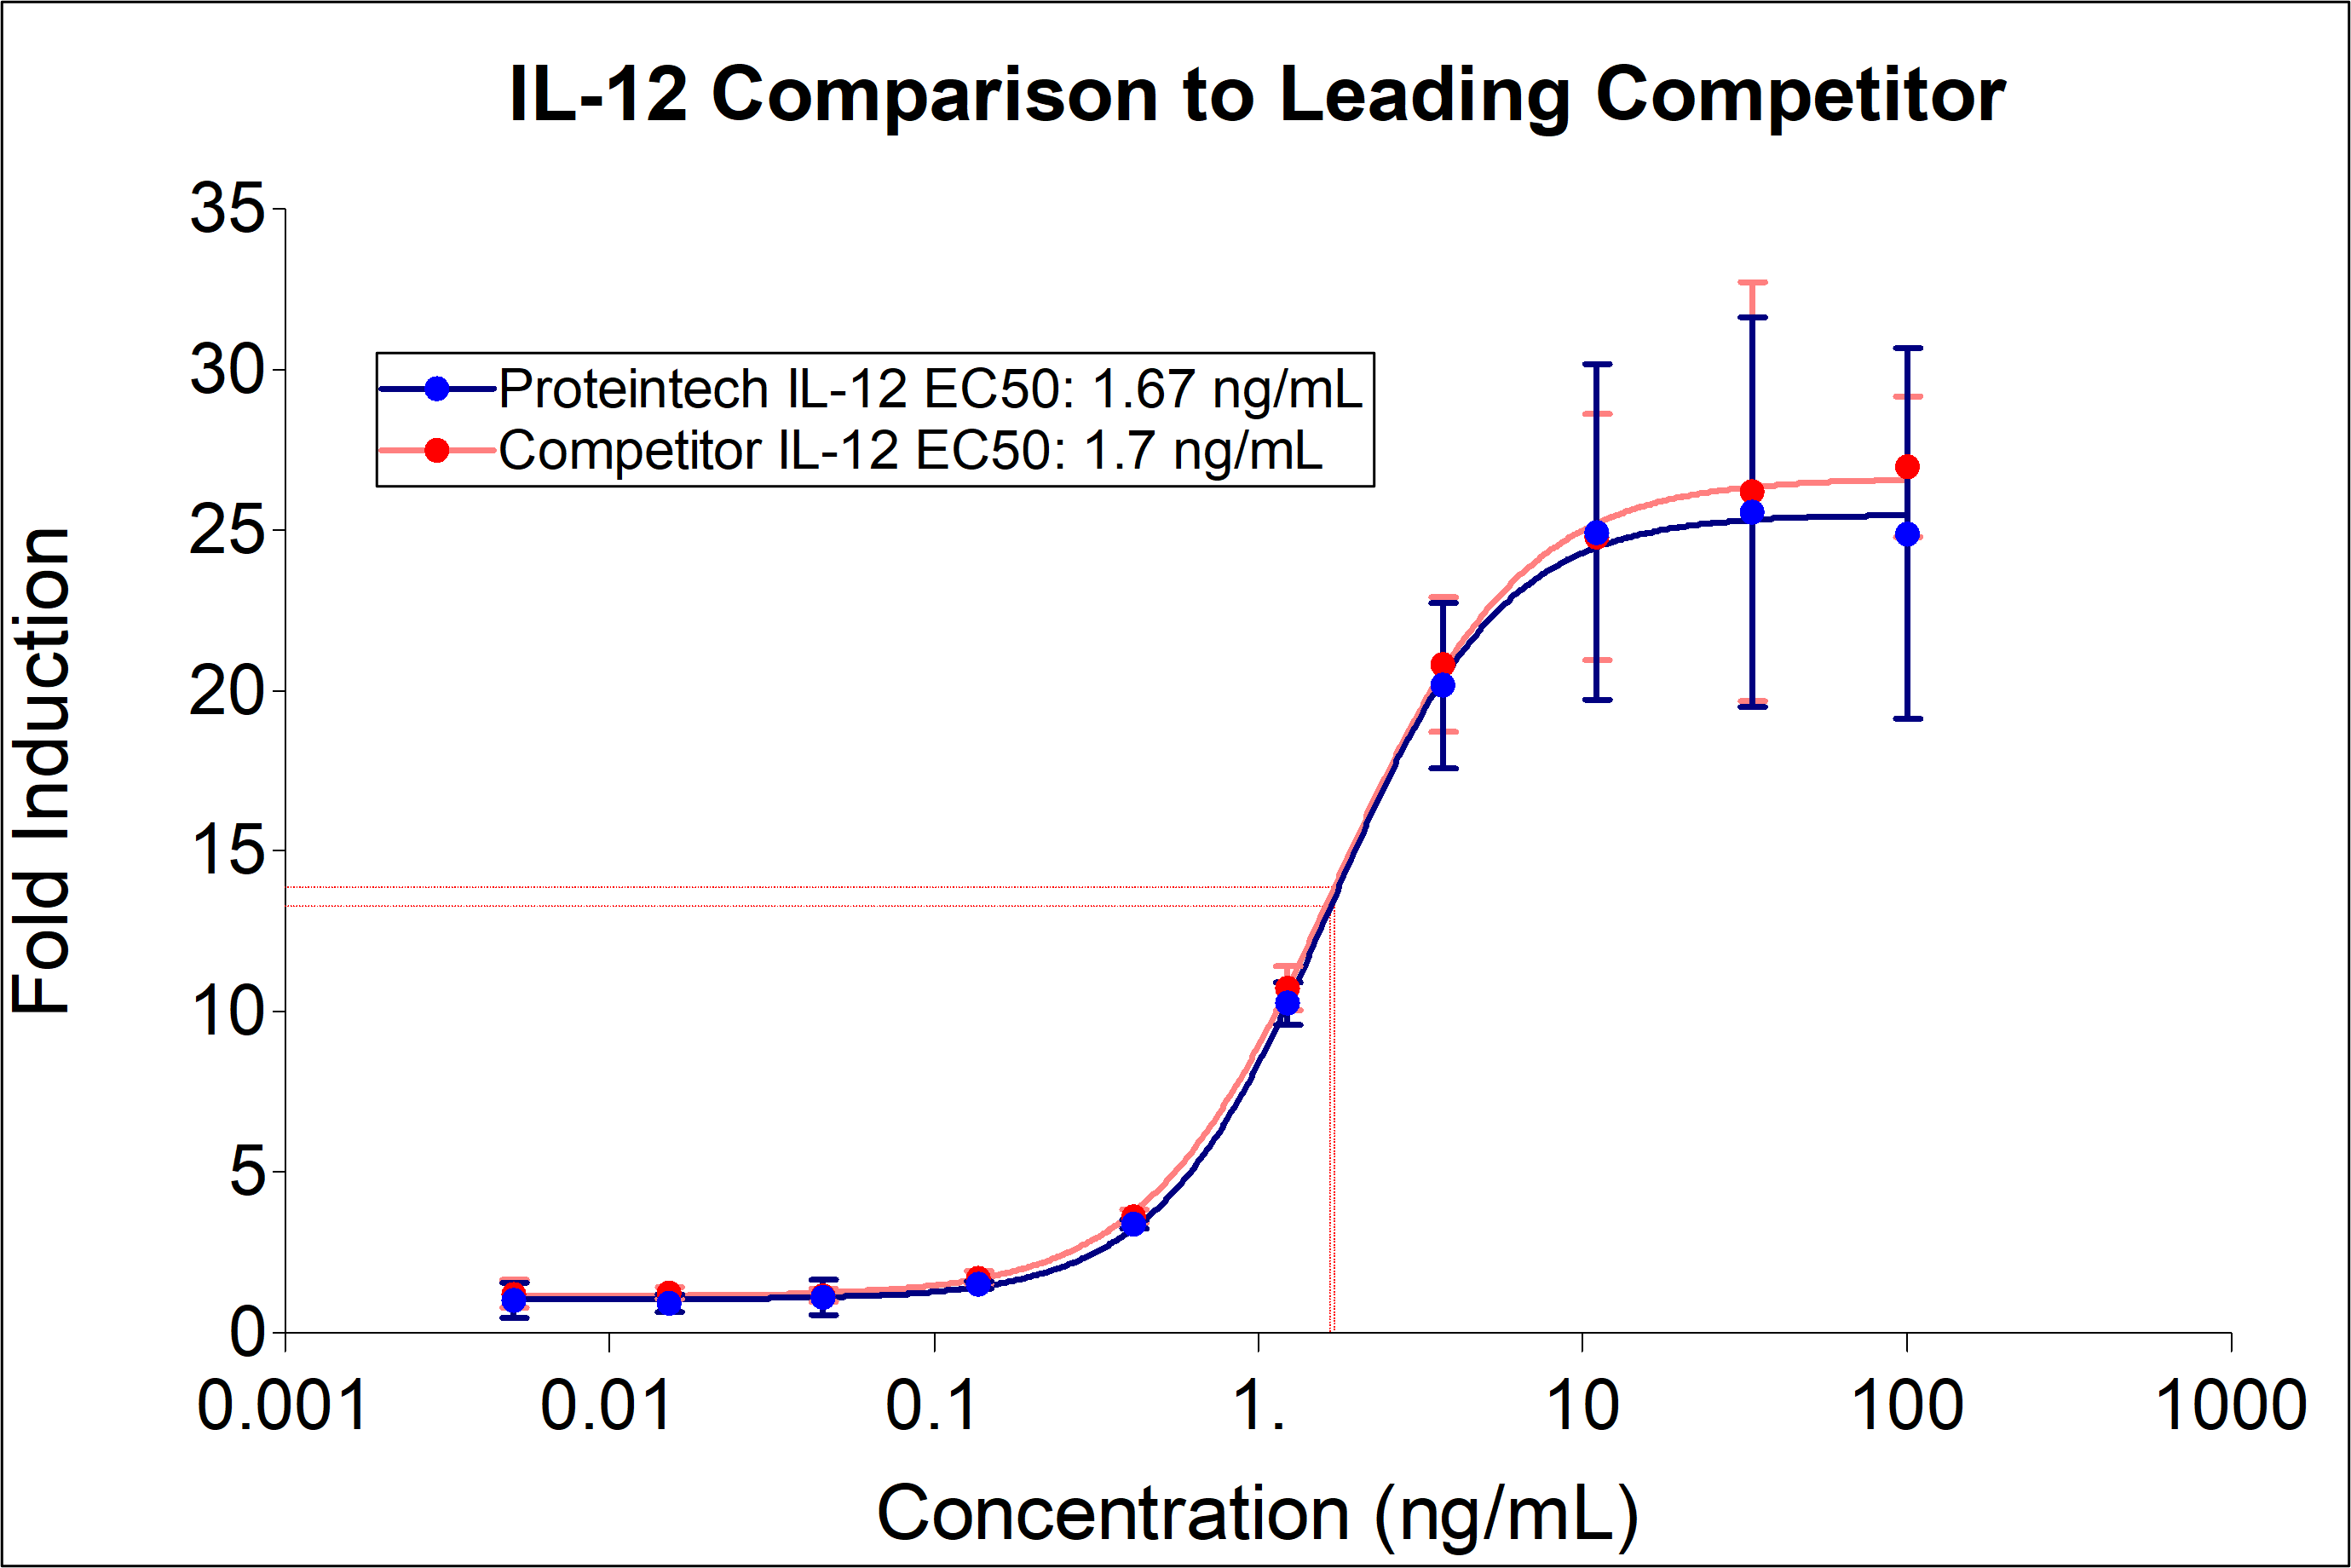 Proteintech IL-12 demonstrates equivalent EC50 and alkaline phosphatase induction to leading competitors. Recombinant human IL-12 (HZ-1256) stimulates dose-dependent induction of alkaline phosphatase production in a HEK293 reporter cell line. Alkaline phosphatase production was assessed using pNPP as a chromogenic substrate. The EC50 was determined using a 4-parameter non-linear regression model. The EC50 values range from 1-5 ng/mL.